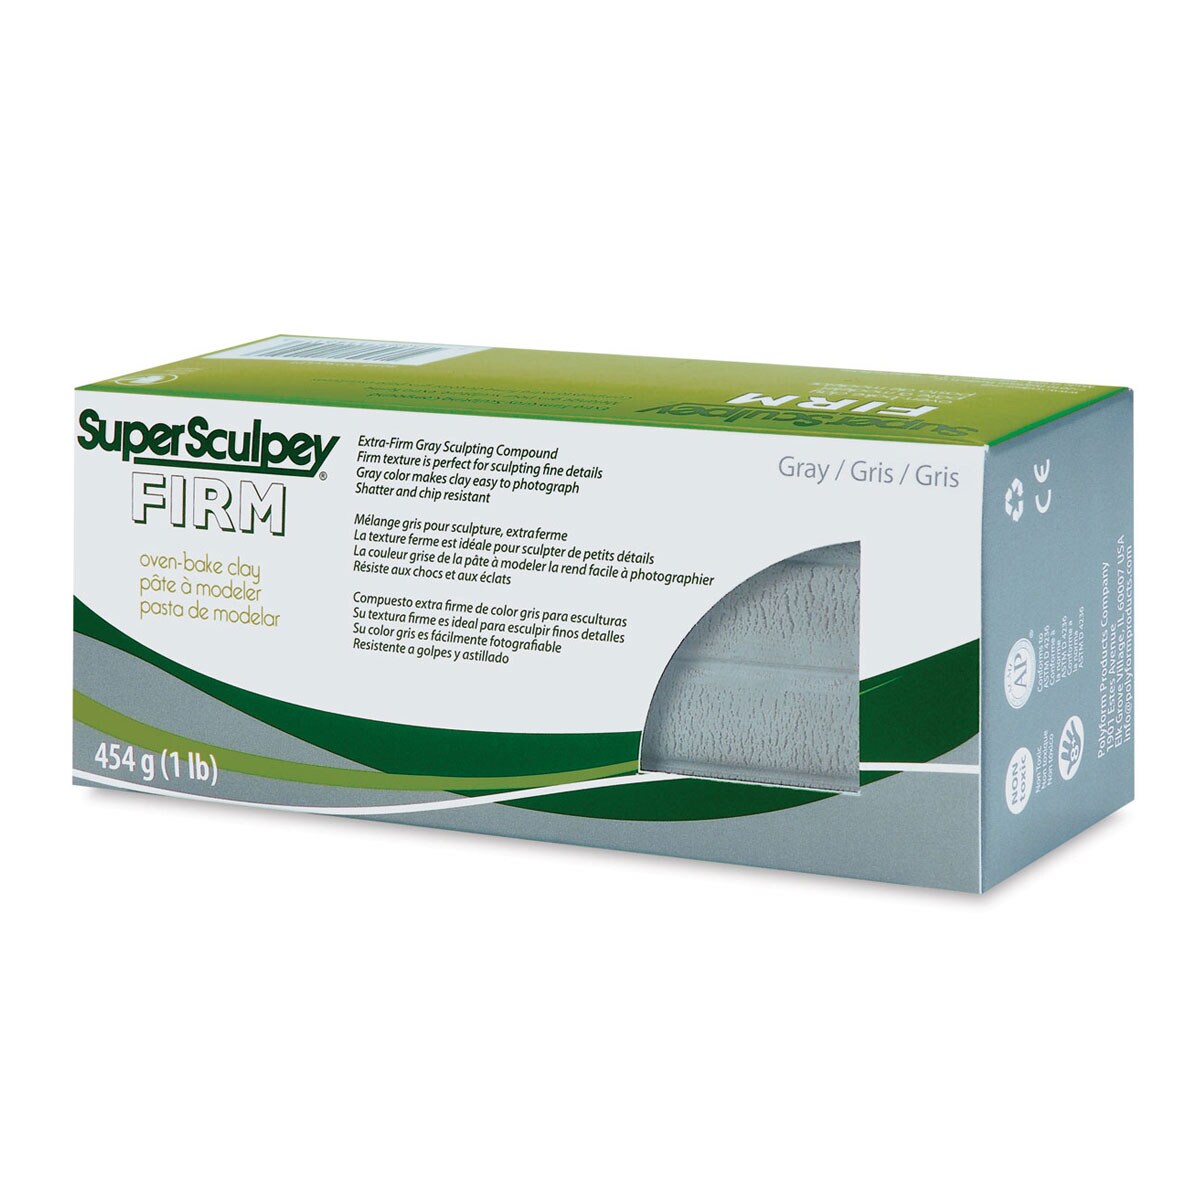 Super Sculpey Firm 1lb 454g., Gray Color, Oven Baked Polymer Clay